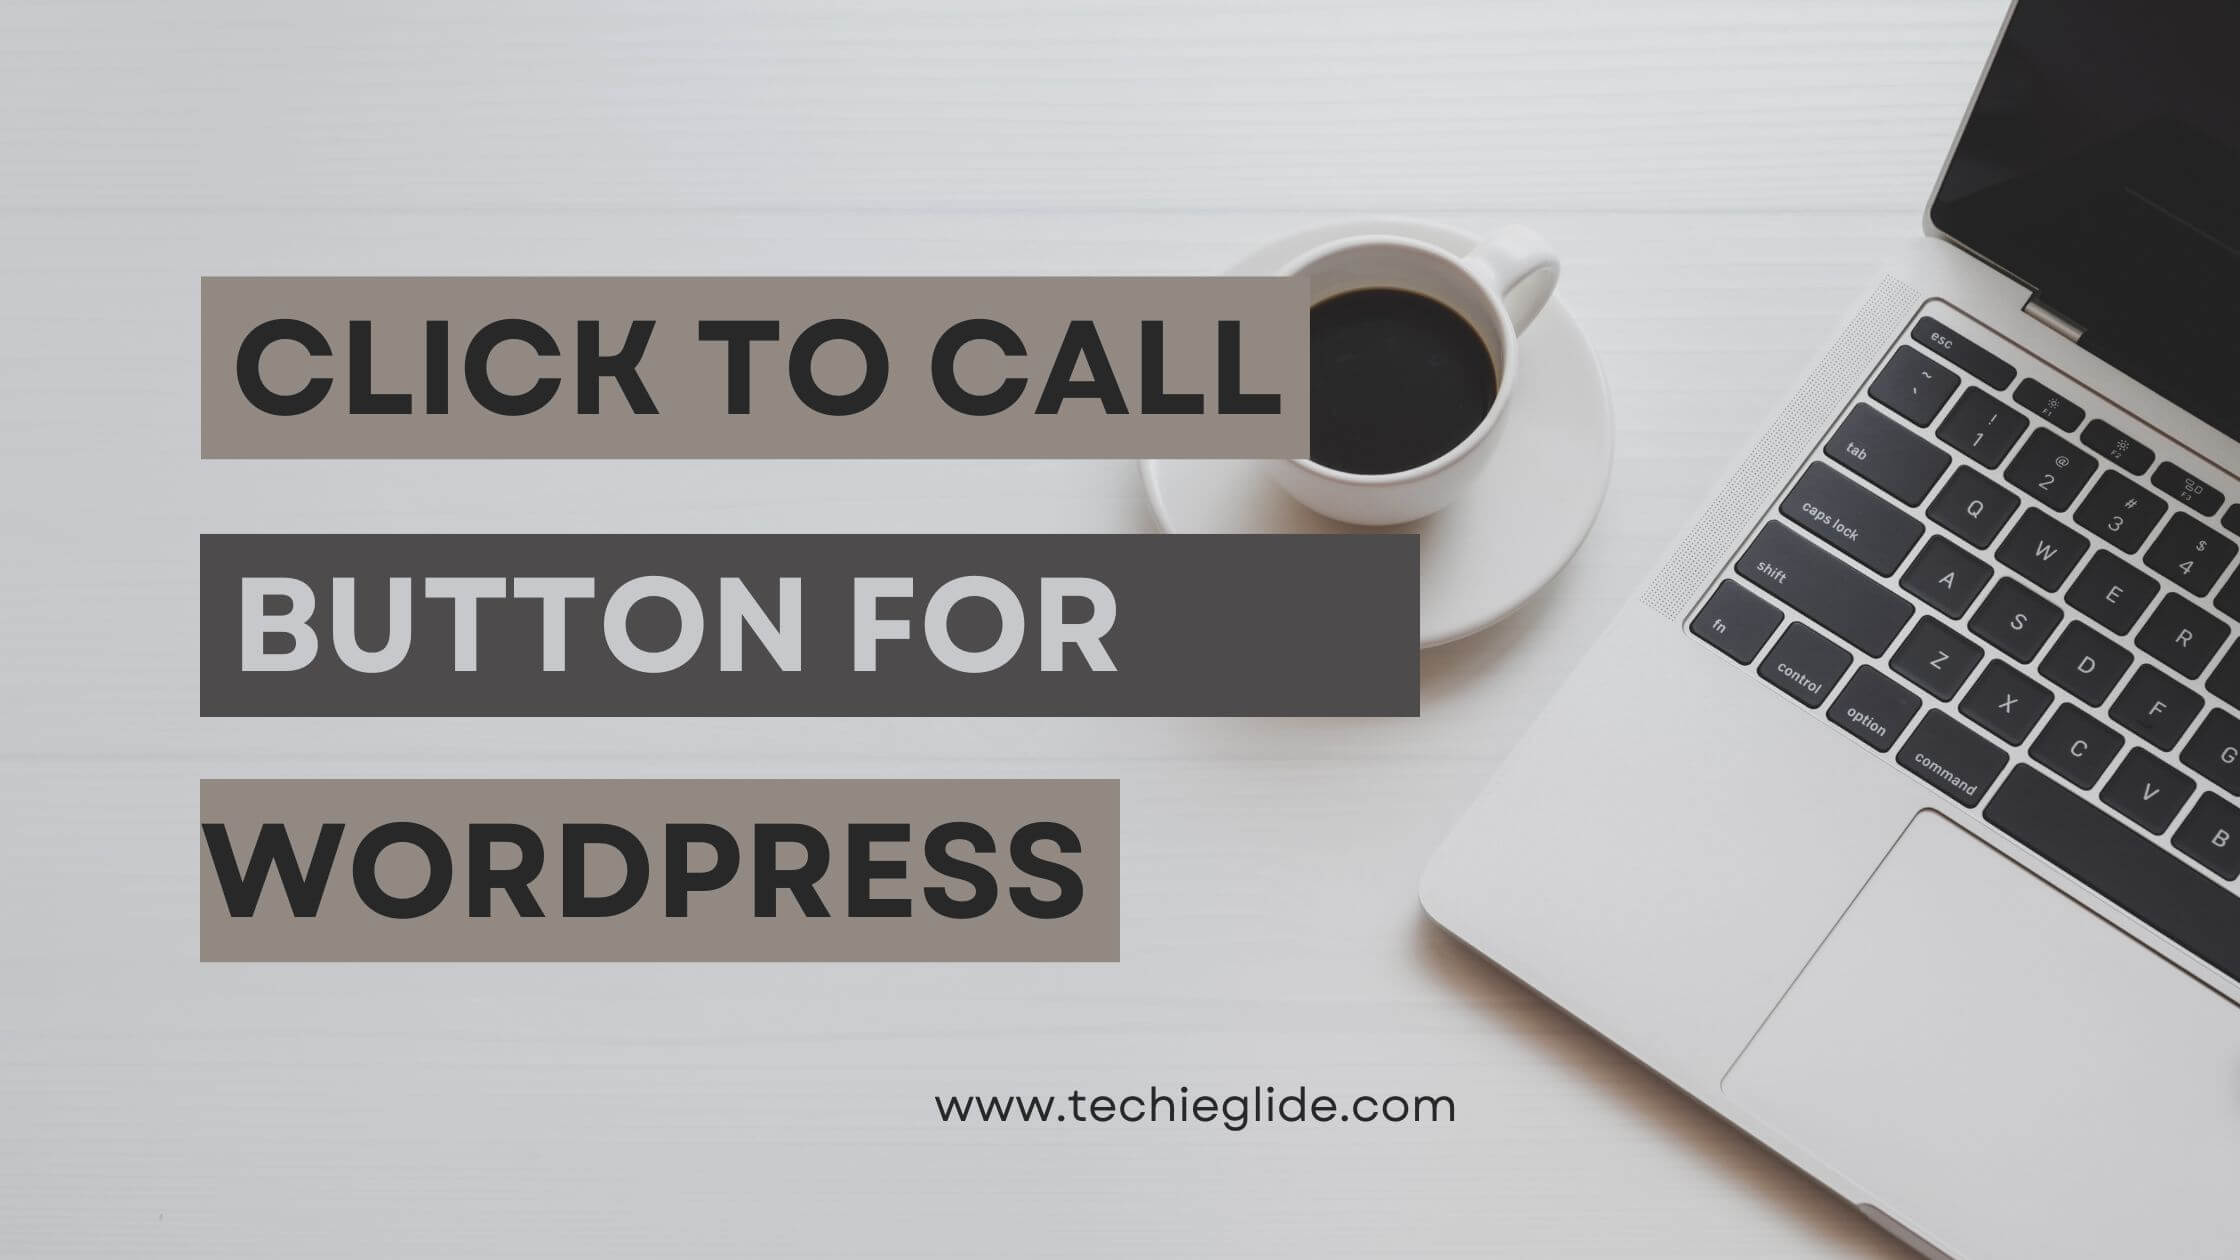 Click to call button in wordpress